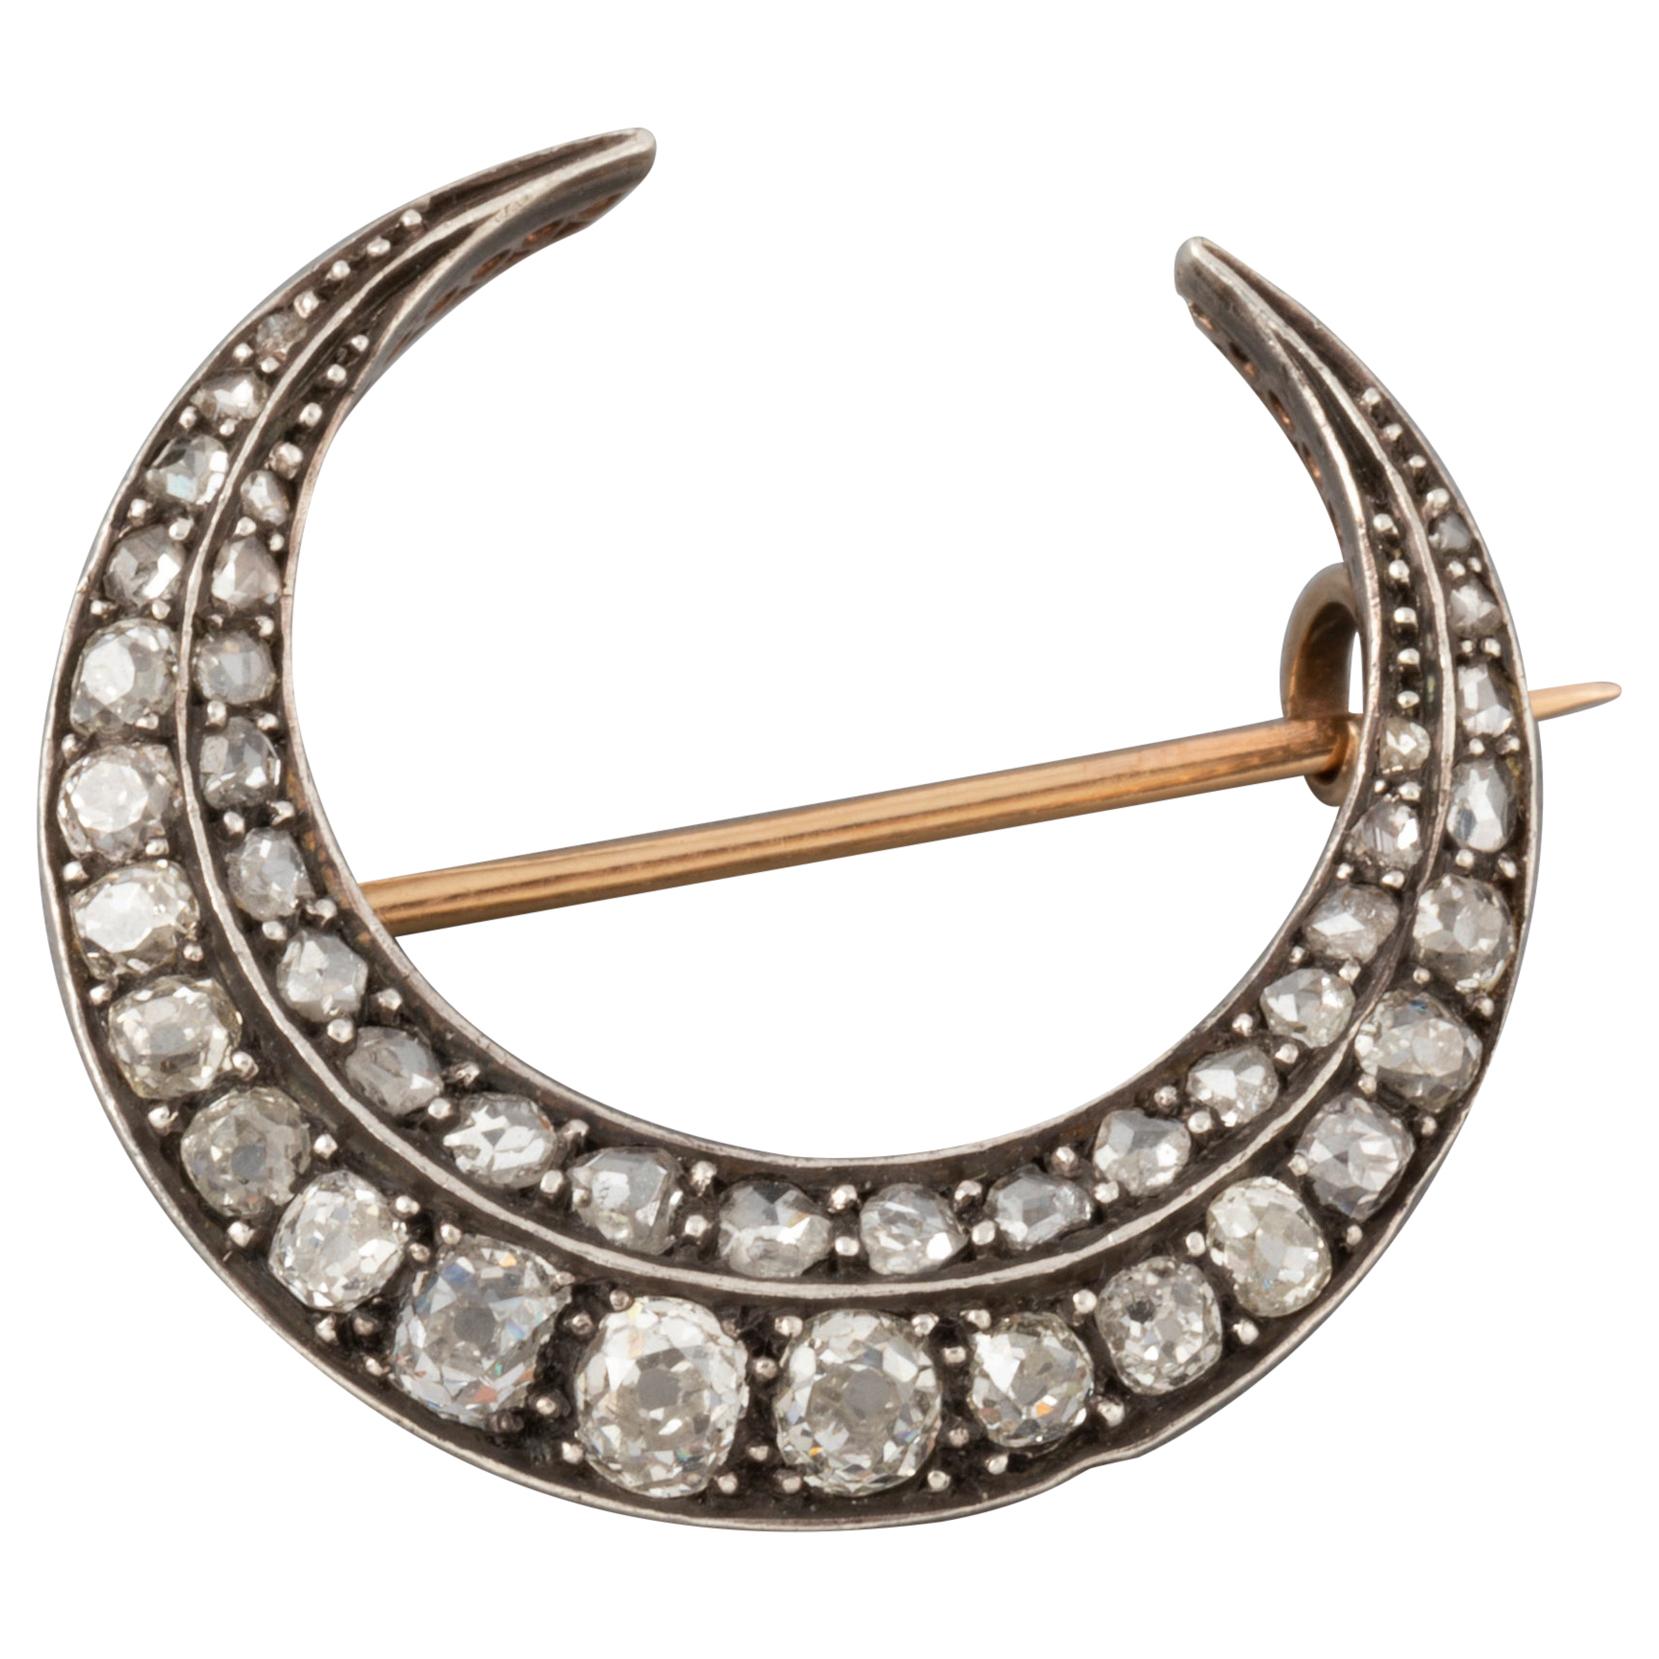 2 Carat Diamonds Antique French Crescent Brooch